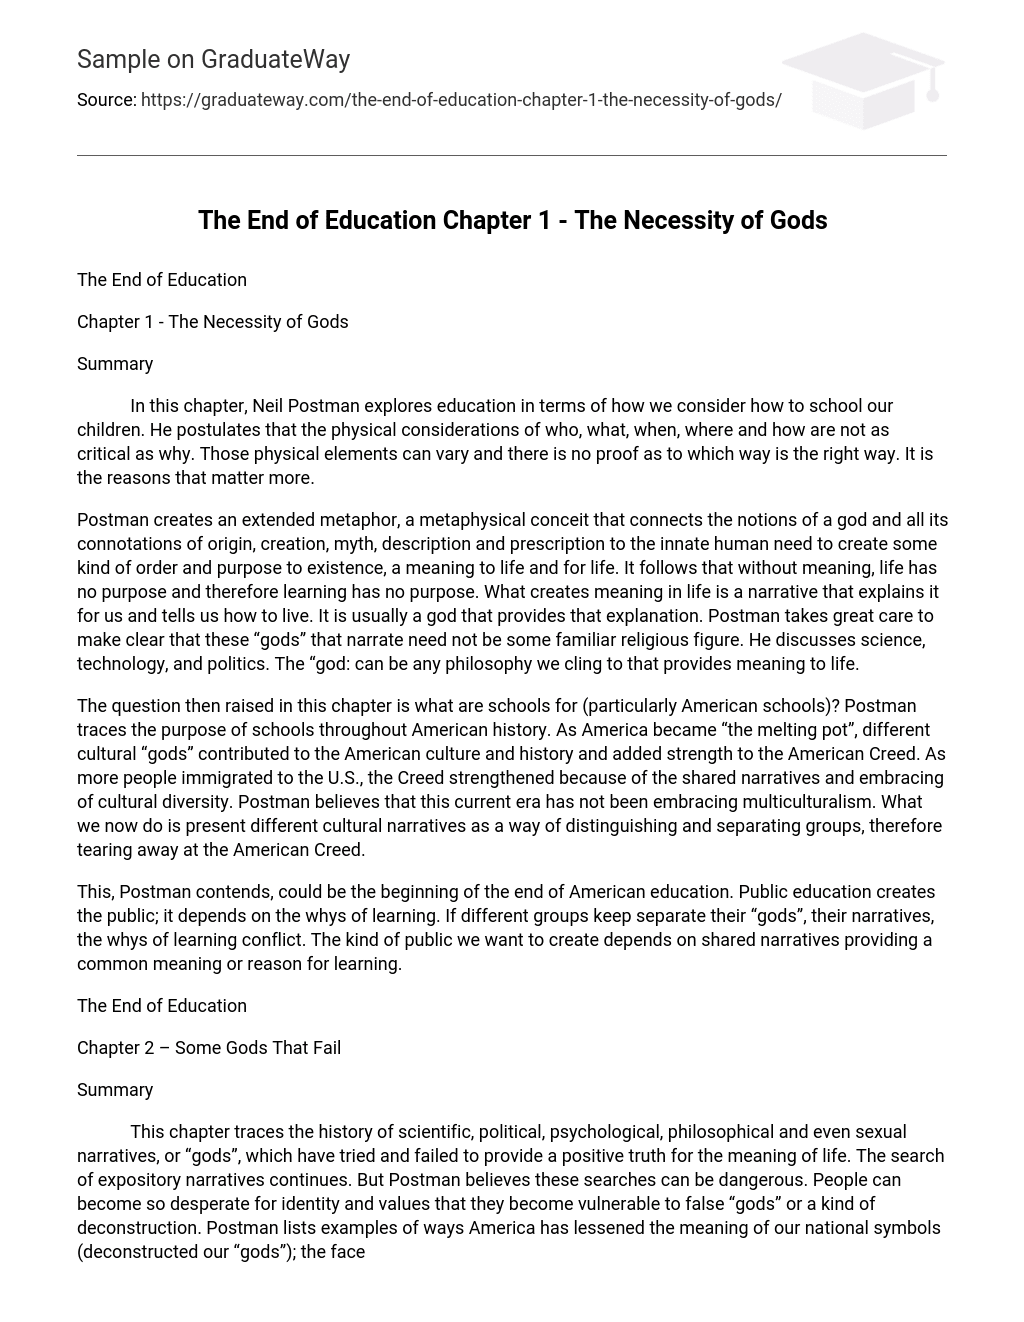 The End of Education Chapter 1 – The Necessity of Gods Short Summary